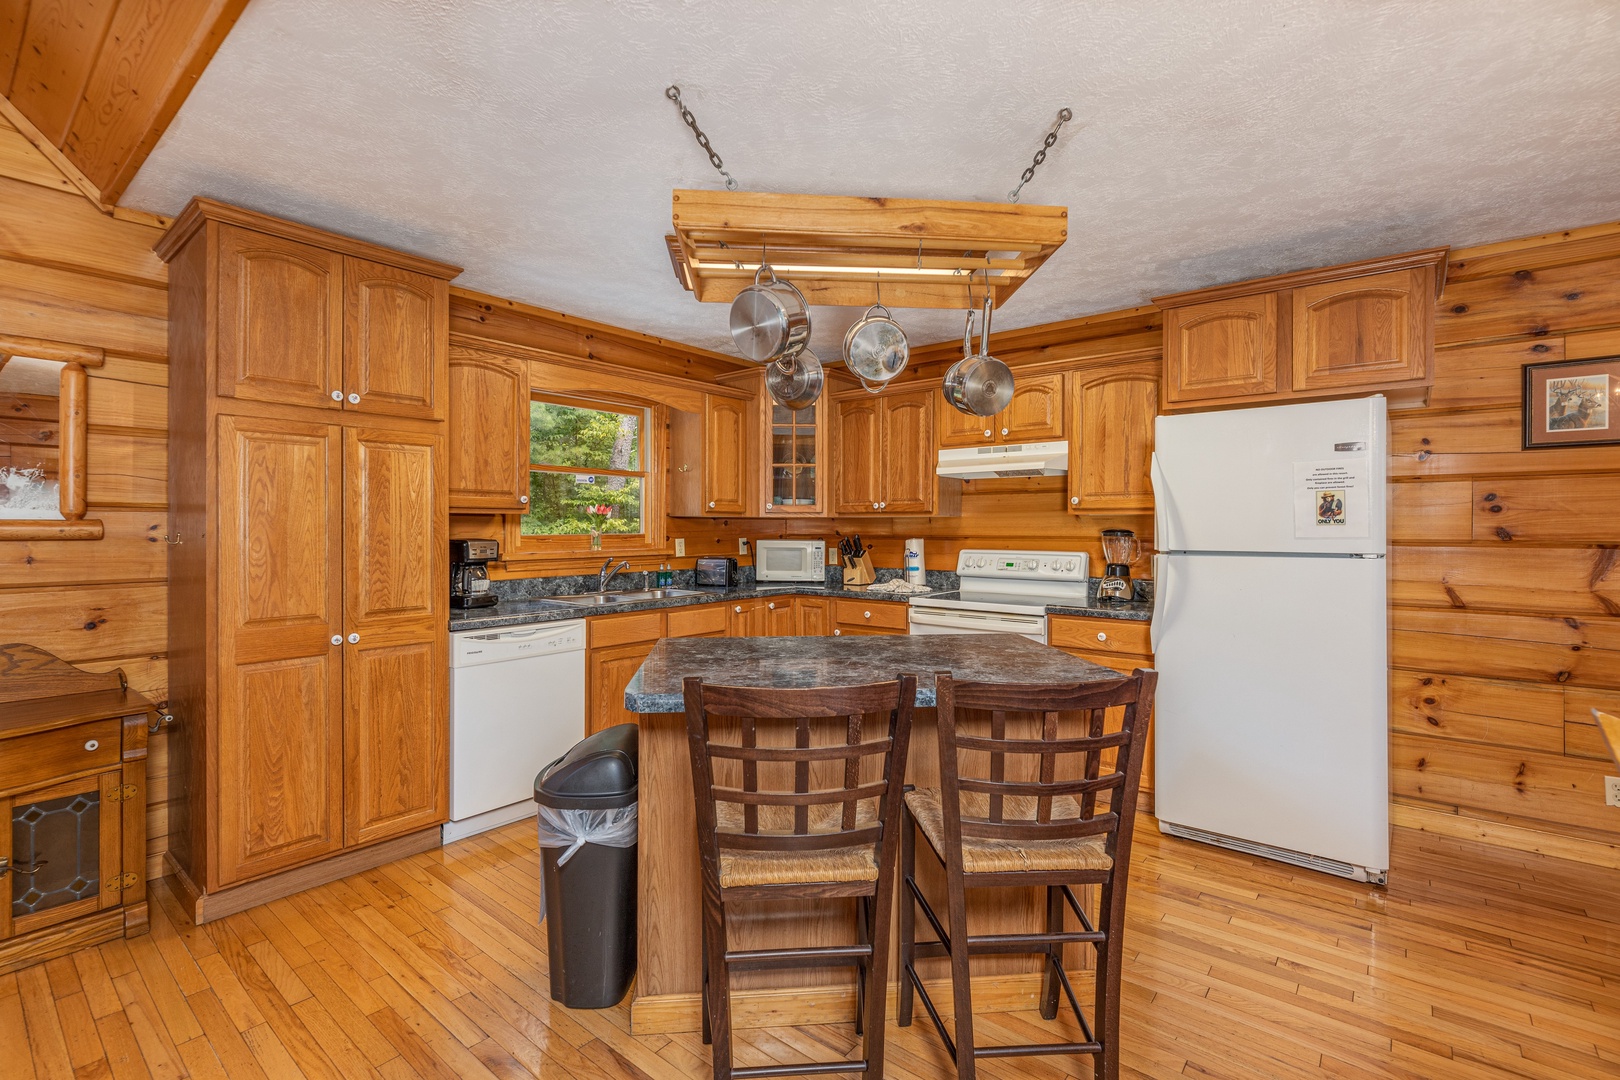 Breakfast bar for two in a kitchen with white appliances at Wildlife Retreat, a 3 bedroom cabin rental located in Pigeon Forge